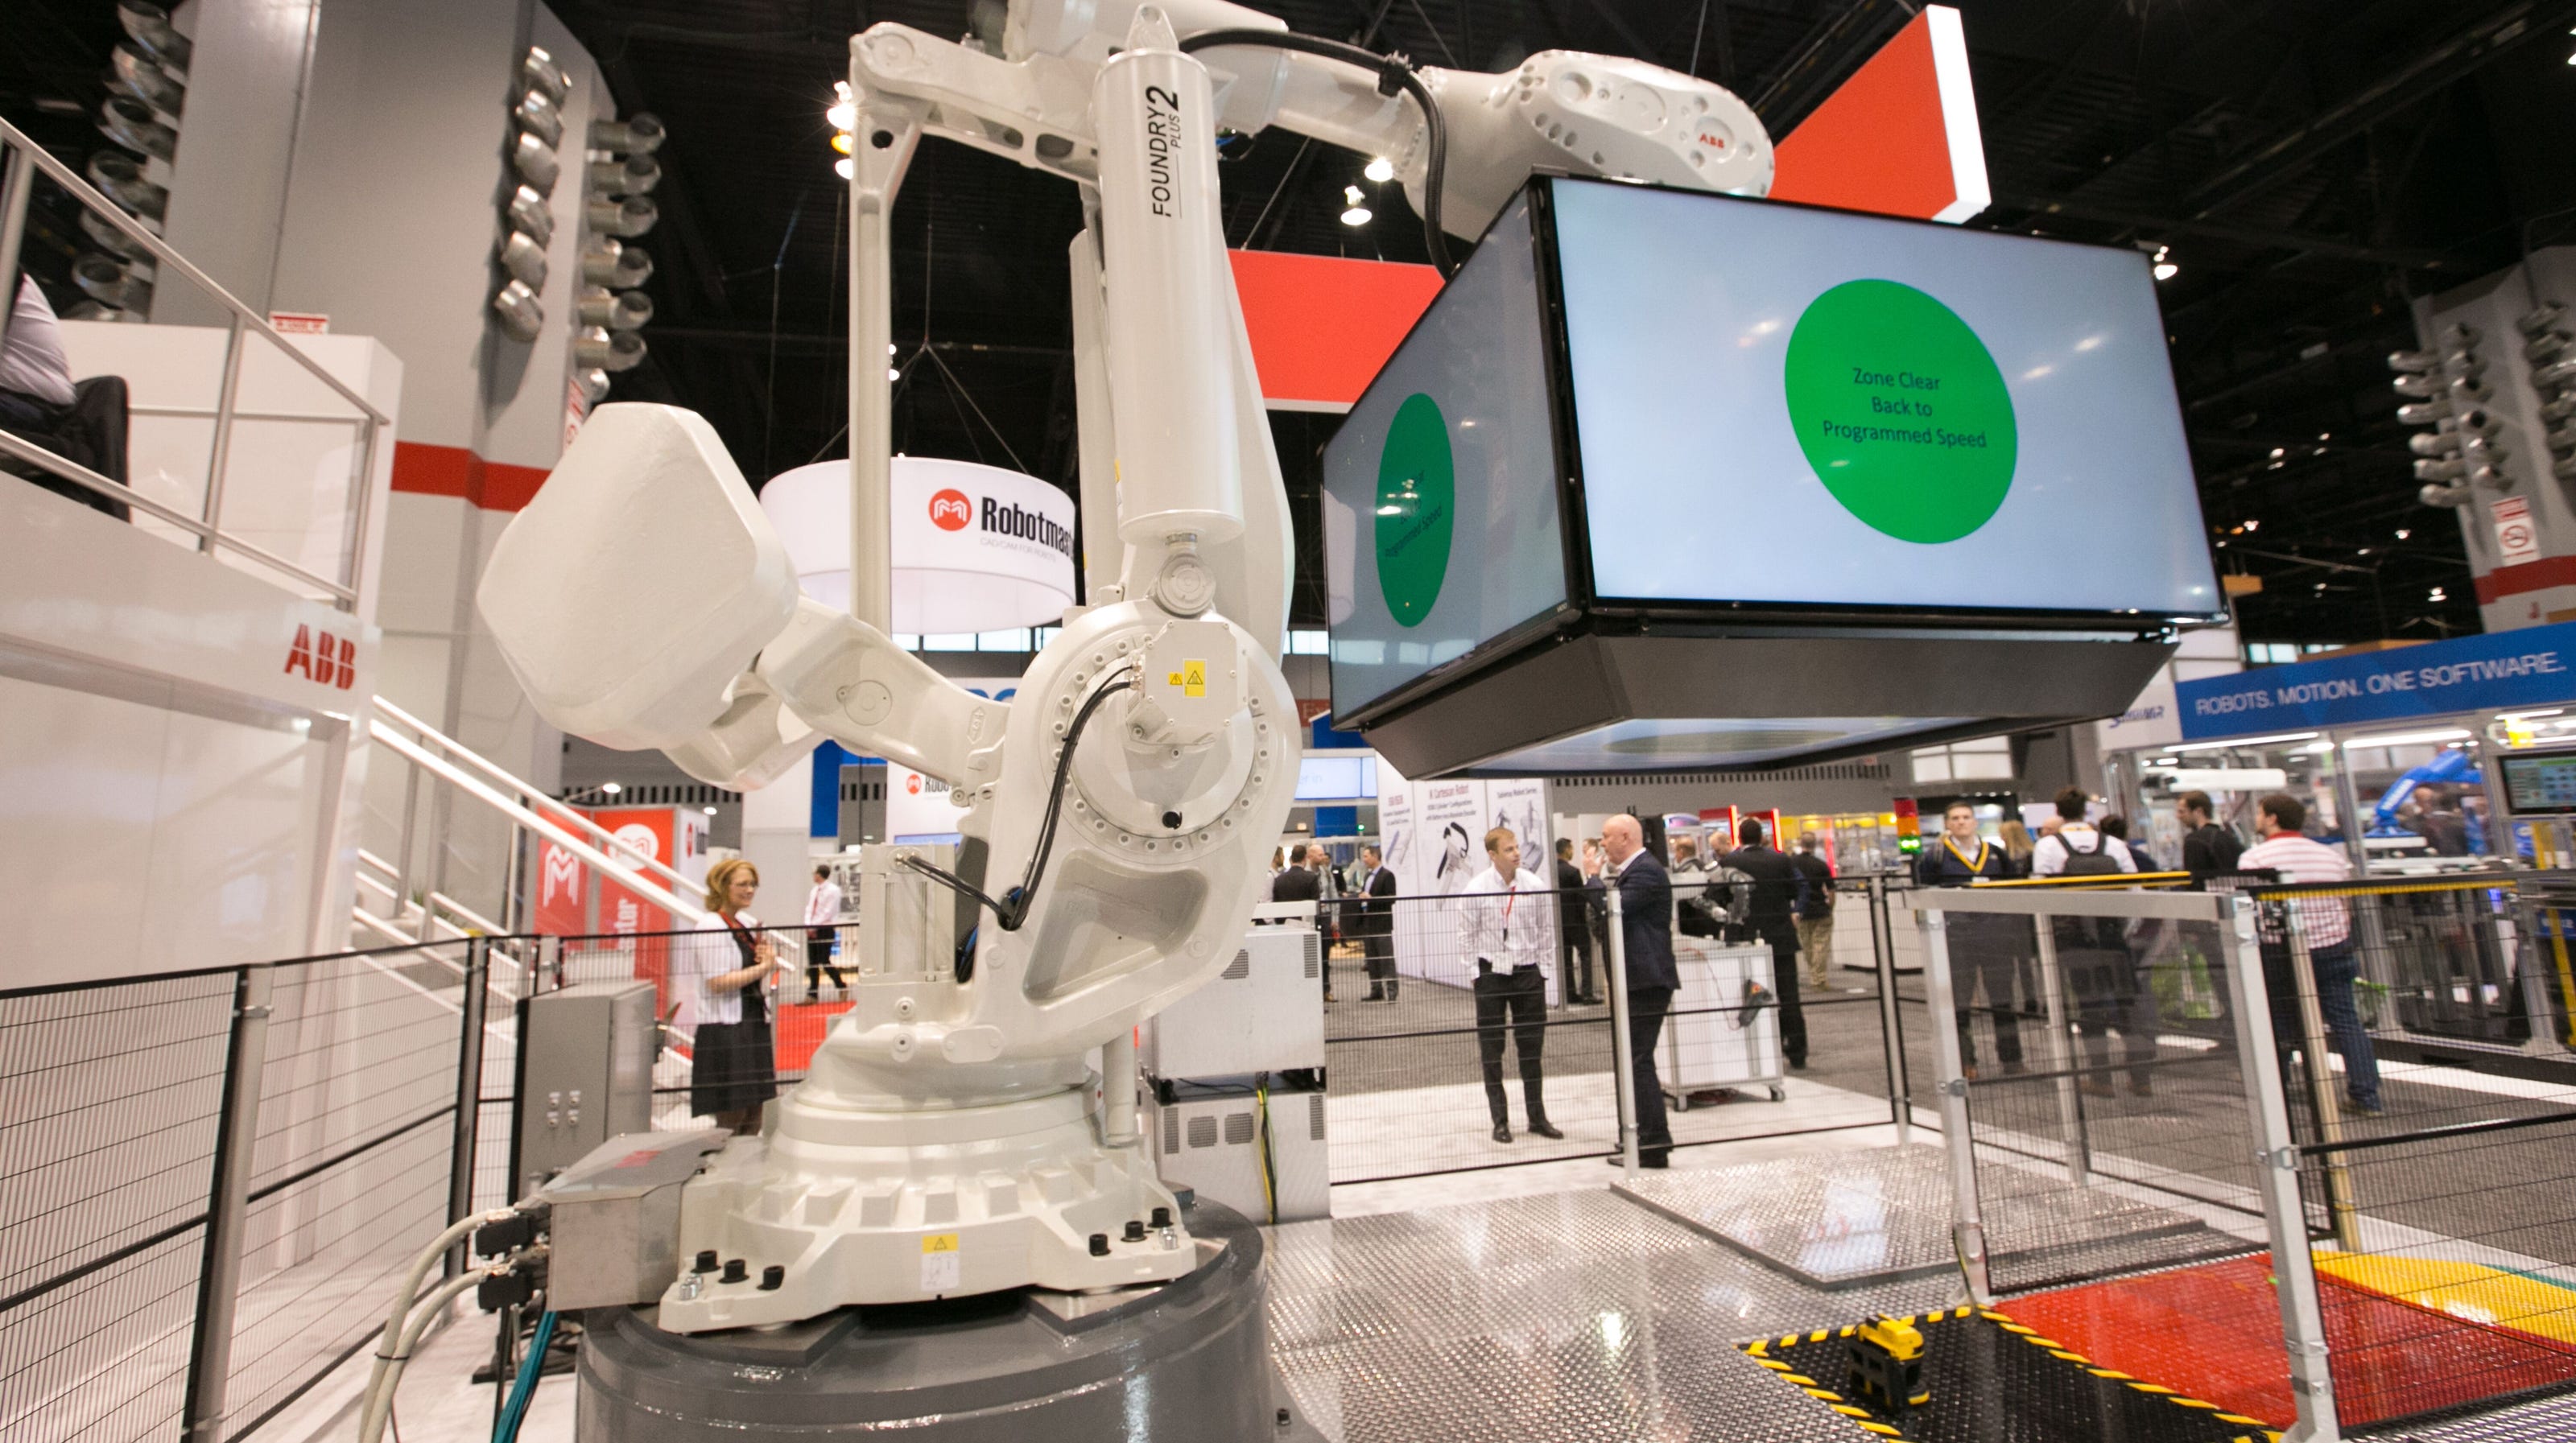 Automate trade show back in Detroit for 2022